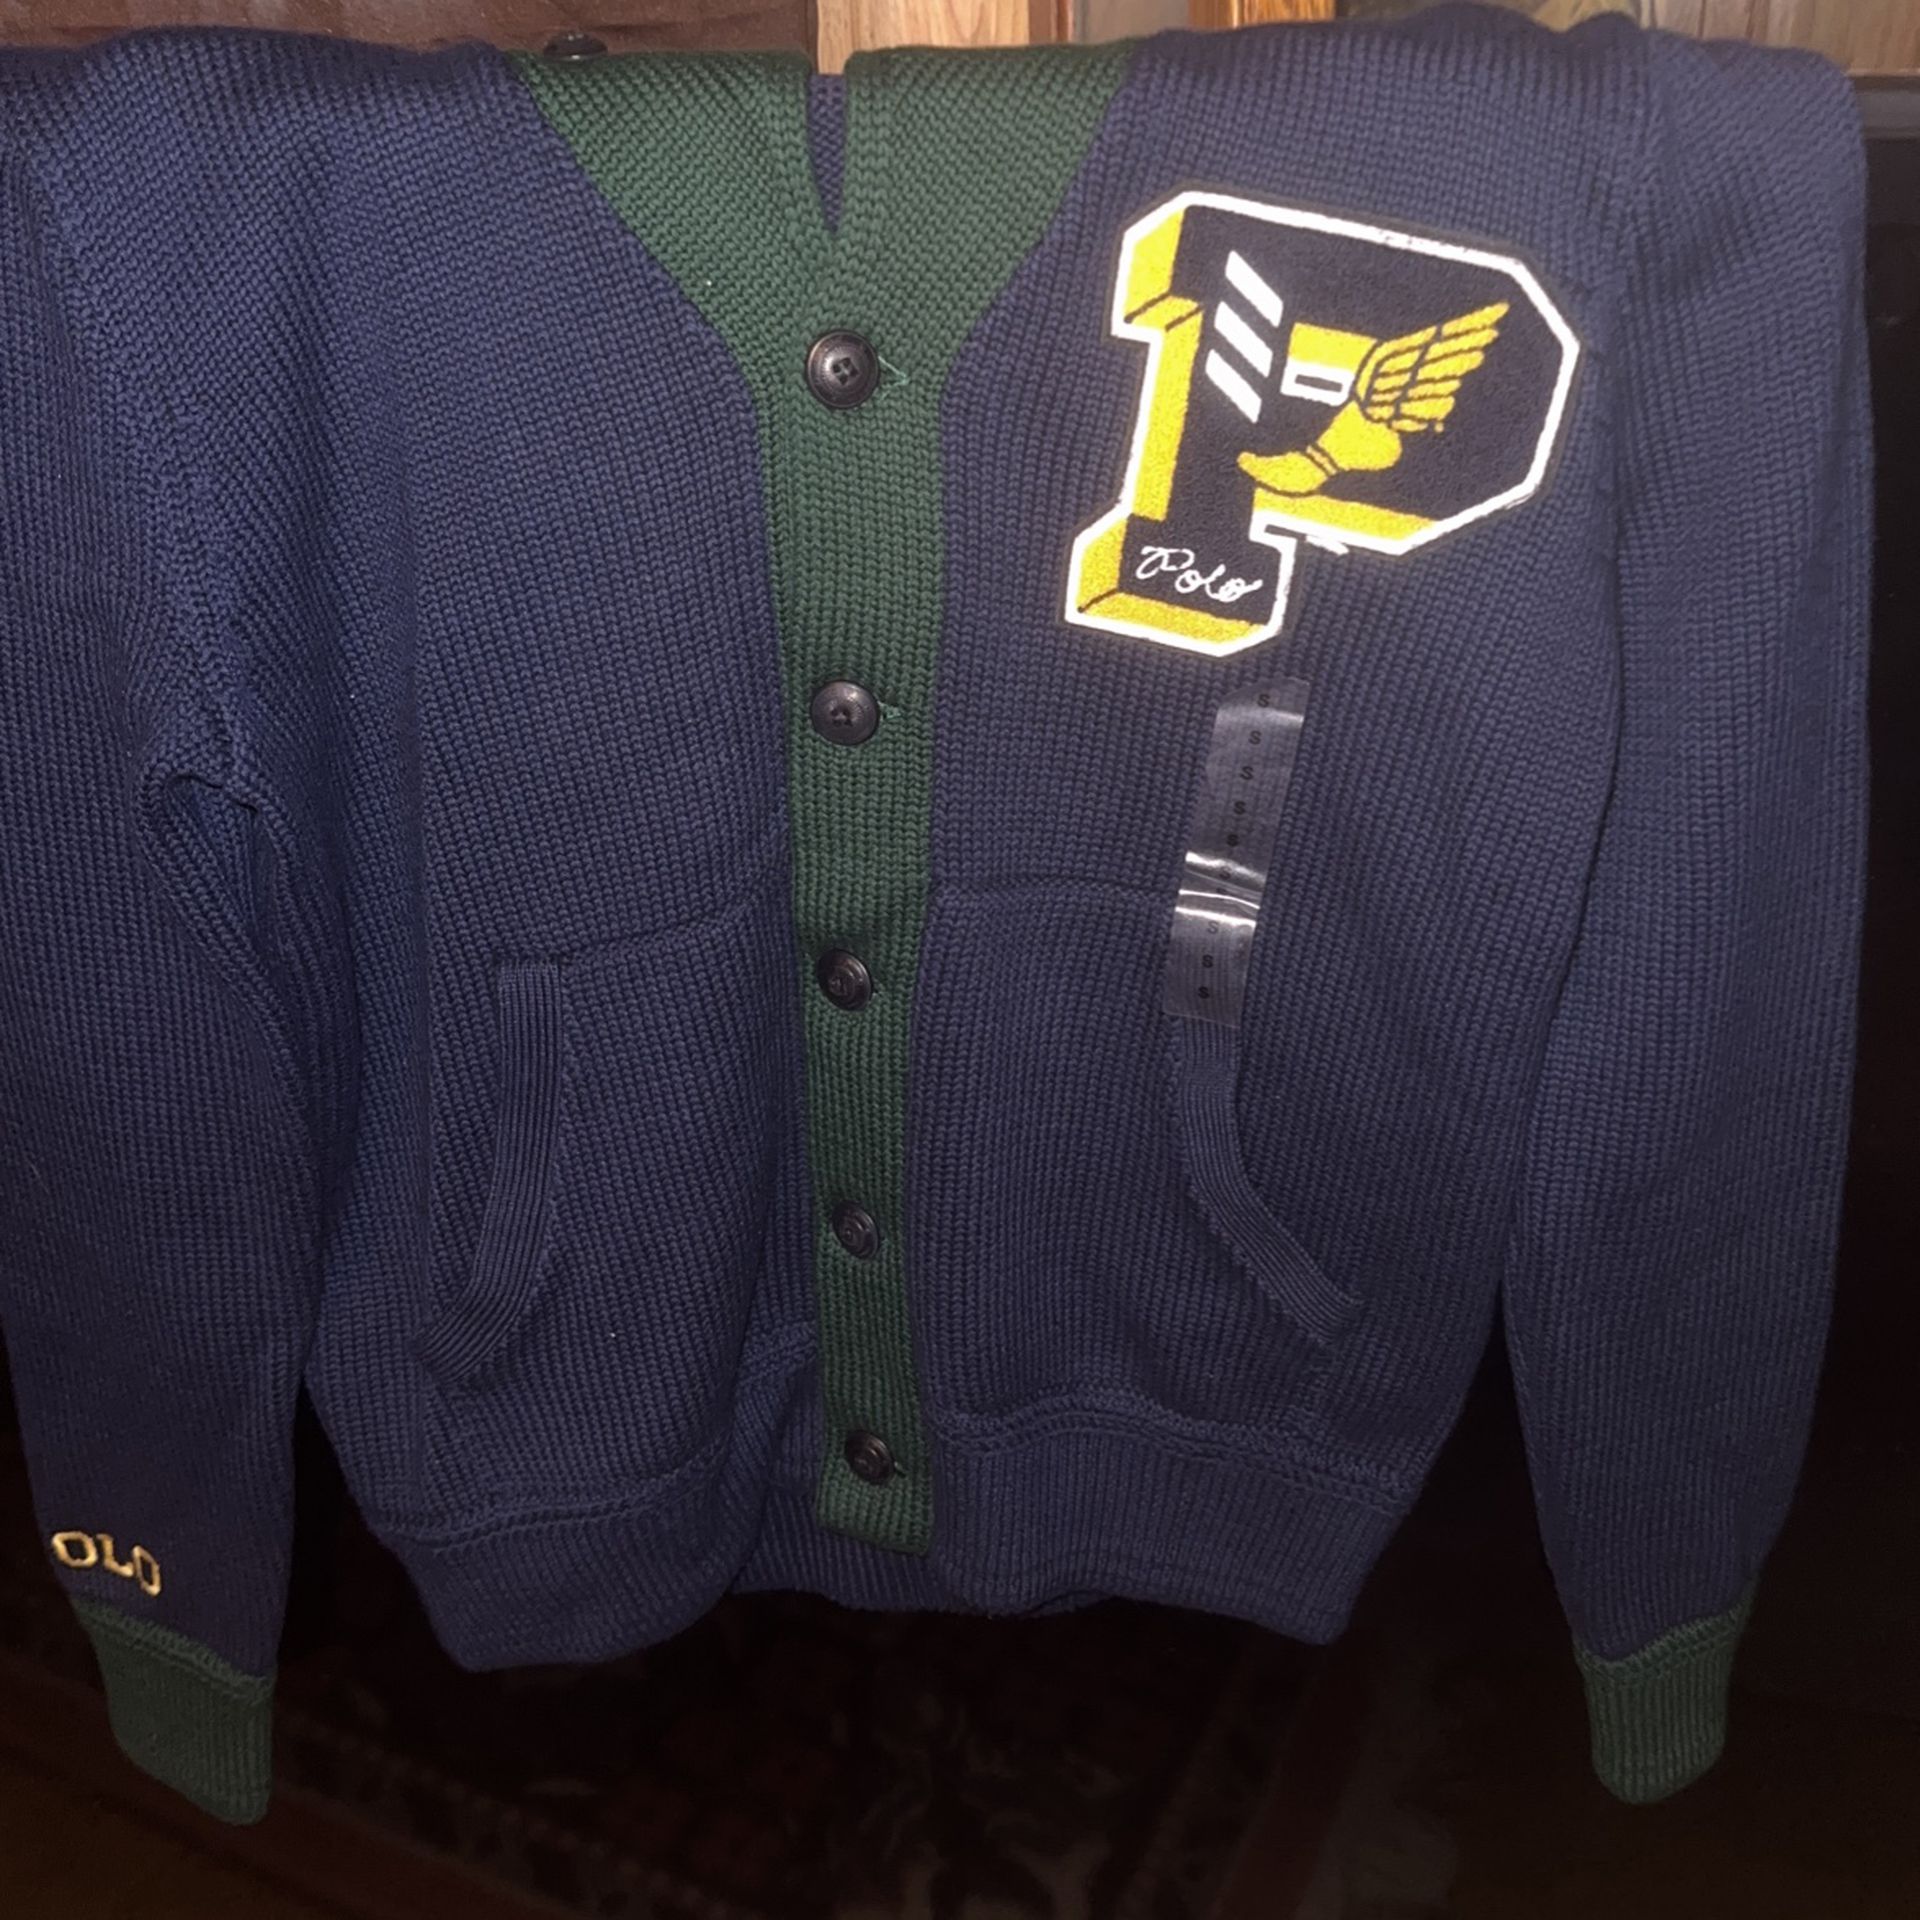 P Wing Polo R. Lauren Sweater Size S/p